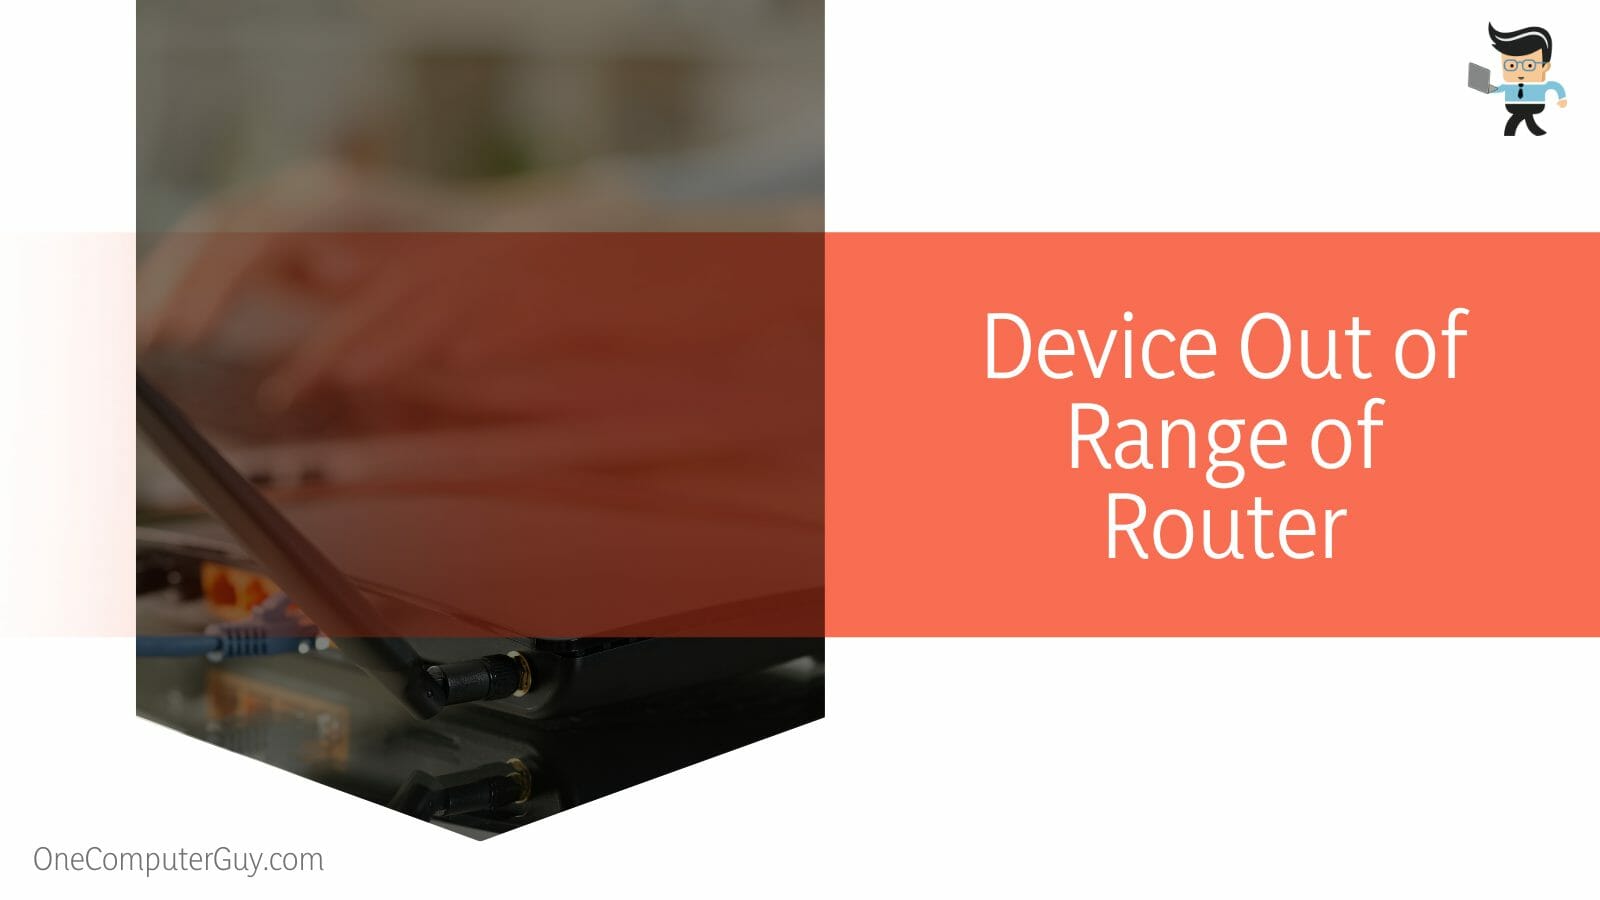 Device Out of Range of Router